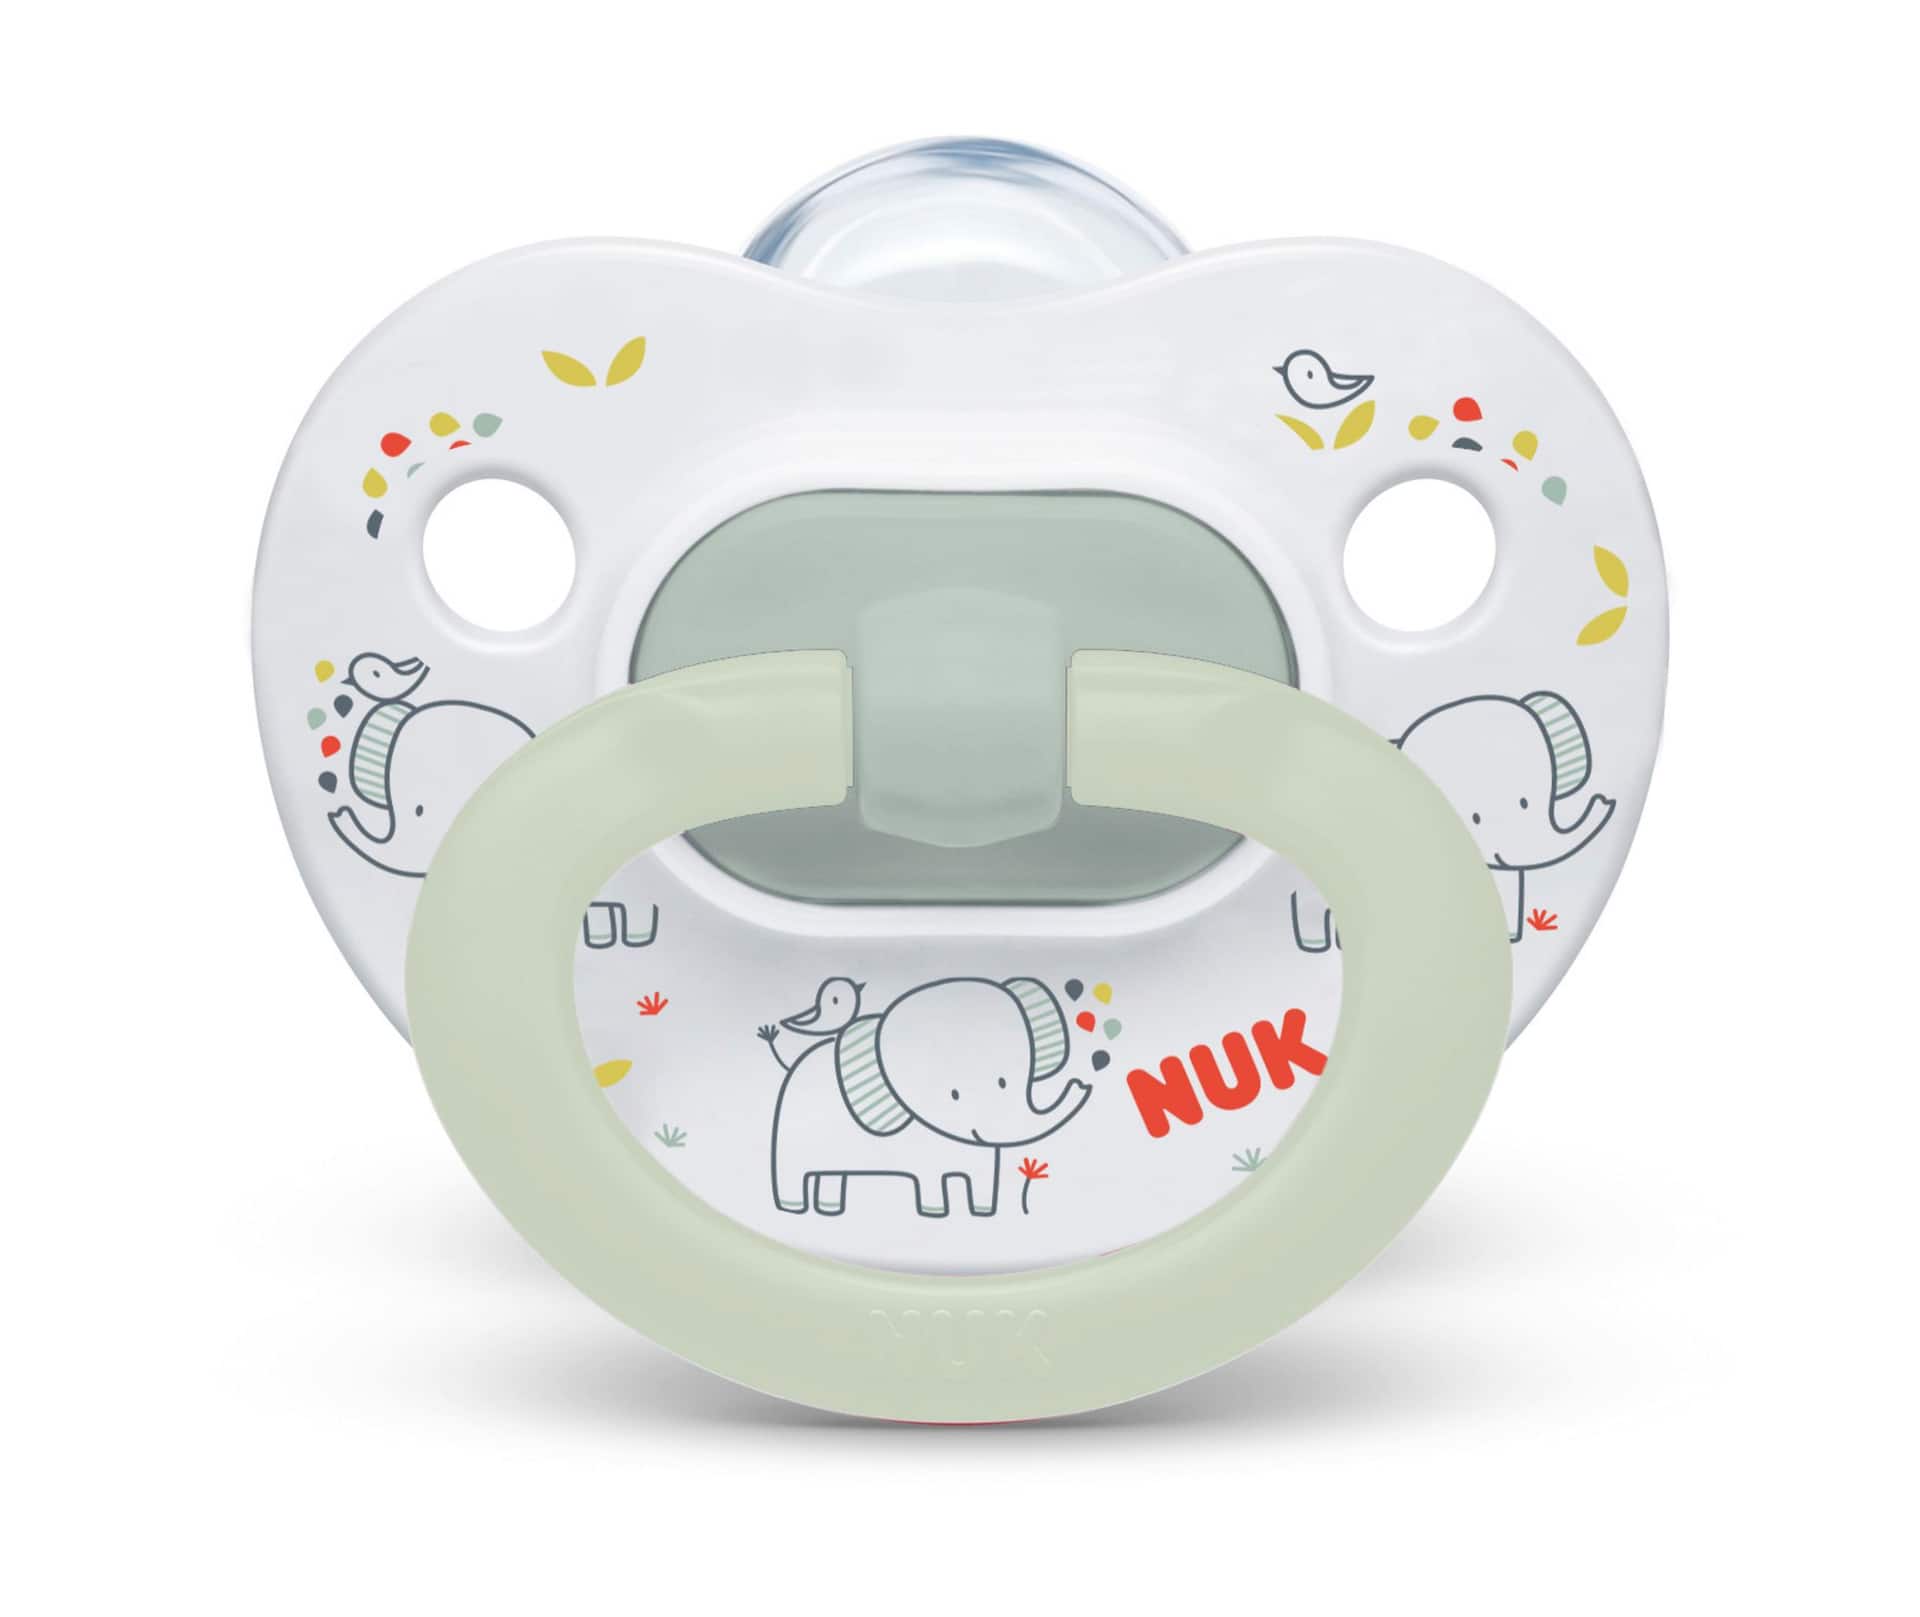 https://media-www.canadiantire.ca/product/automotive/car-care-accessories/child-travel-safety/0468442/nuk-pacifier-size-1-2pk-1ae0b0de-a3bb-4973-898c-d0e311f9afd3-jpgrendition.jpg